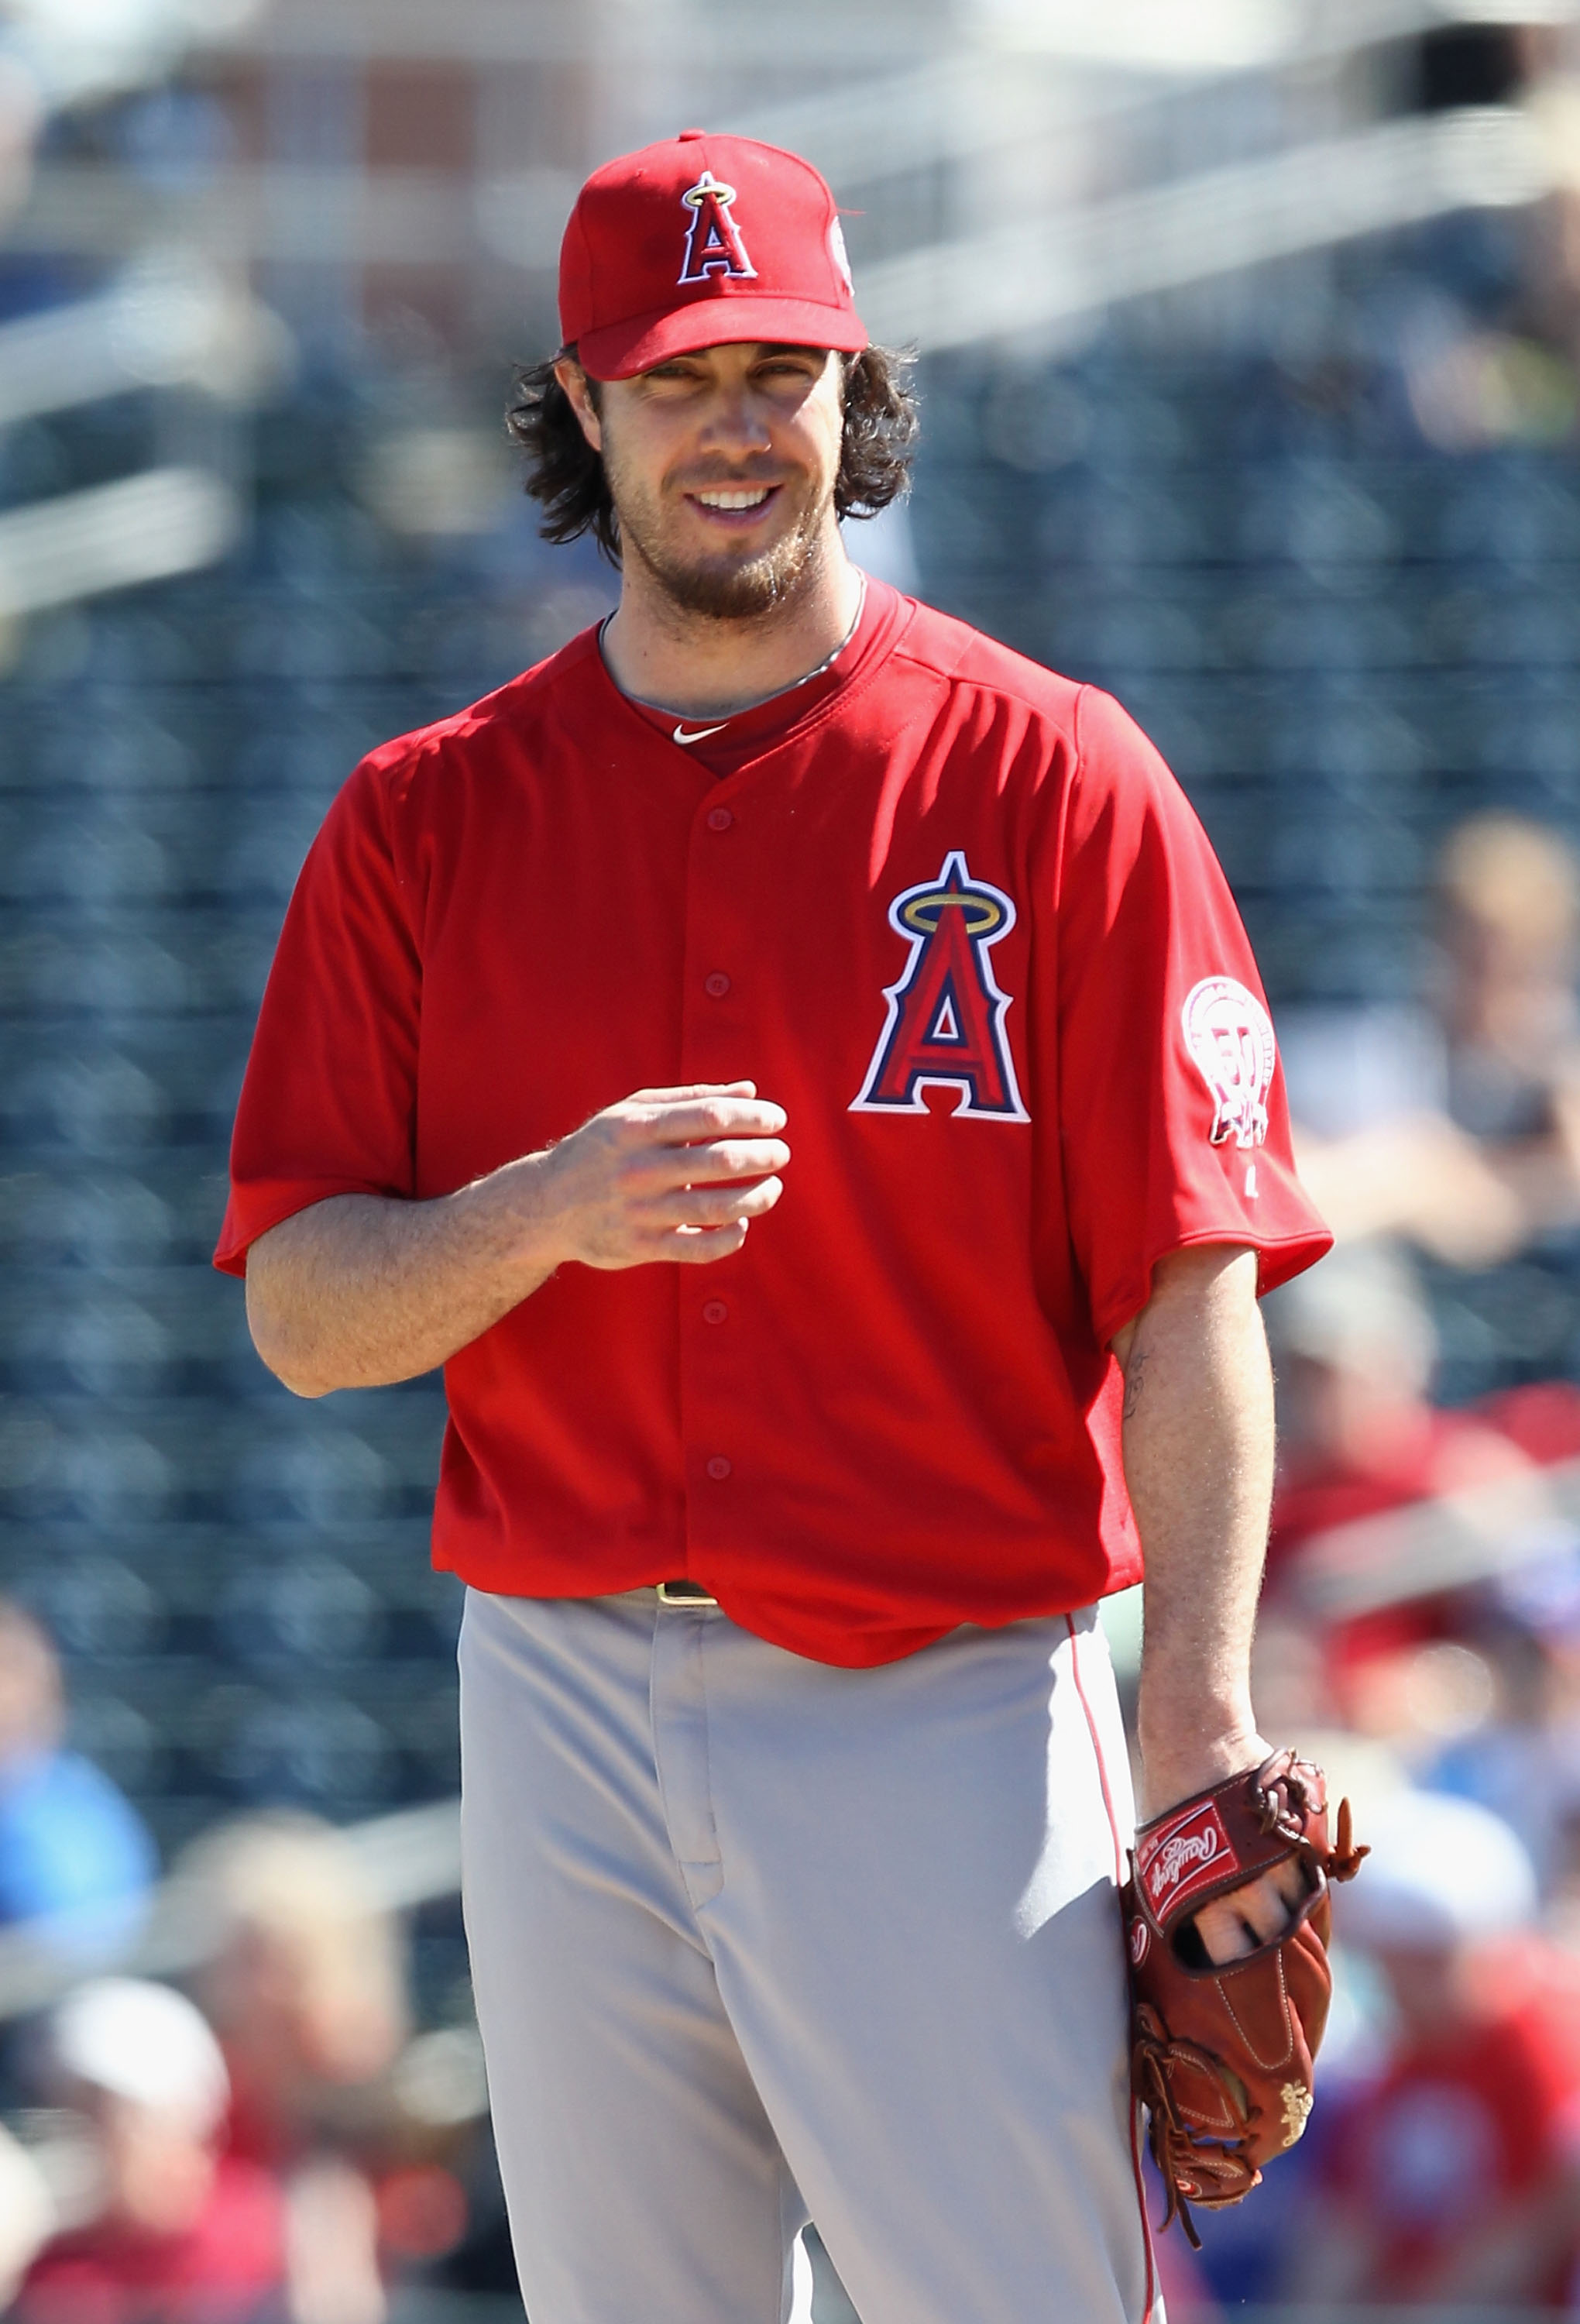 SURPRISE, AZ - MARCH 02:  Starting pitcher Dan Haren #24 of the Los Angeles Angels of Anaheim during the spring training game against the Texas Rangers at Surprise Stadium on March 2, 2011 in Surprise, Arizona.  (Photo by Christian Petersen/Getty Images)